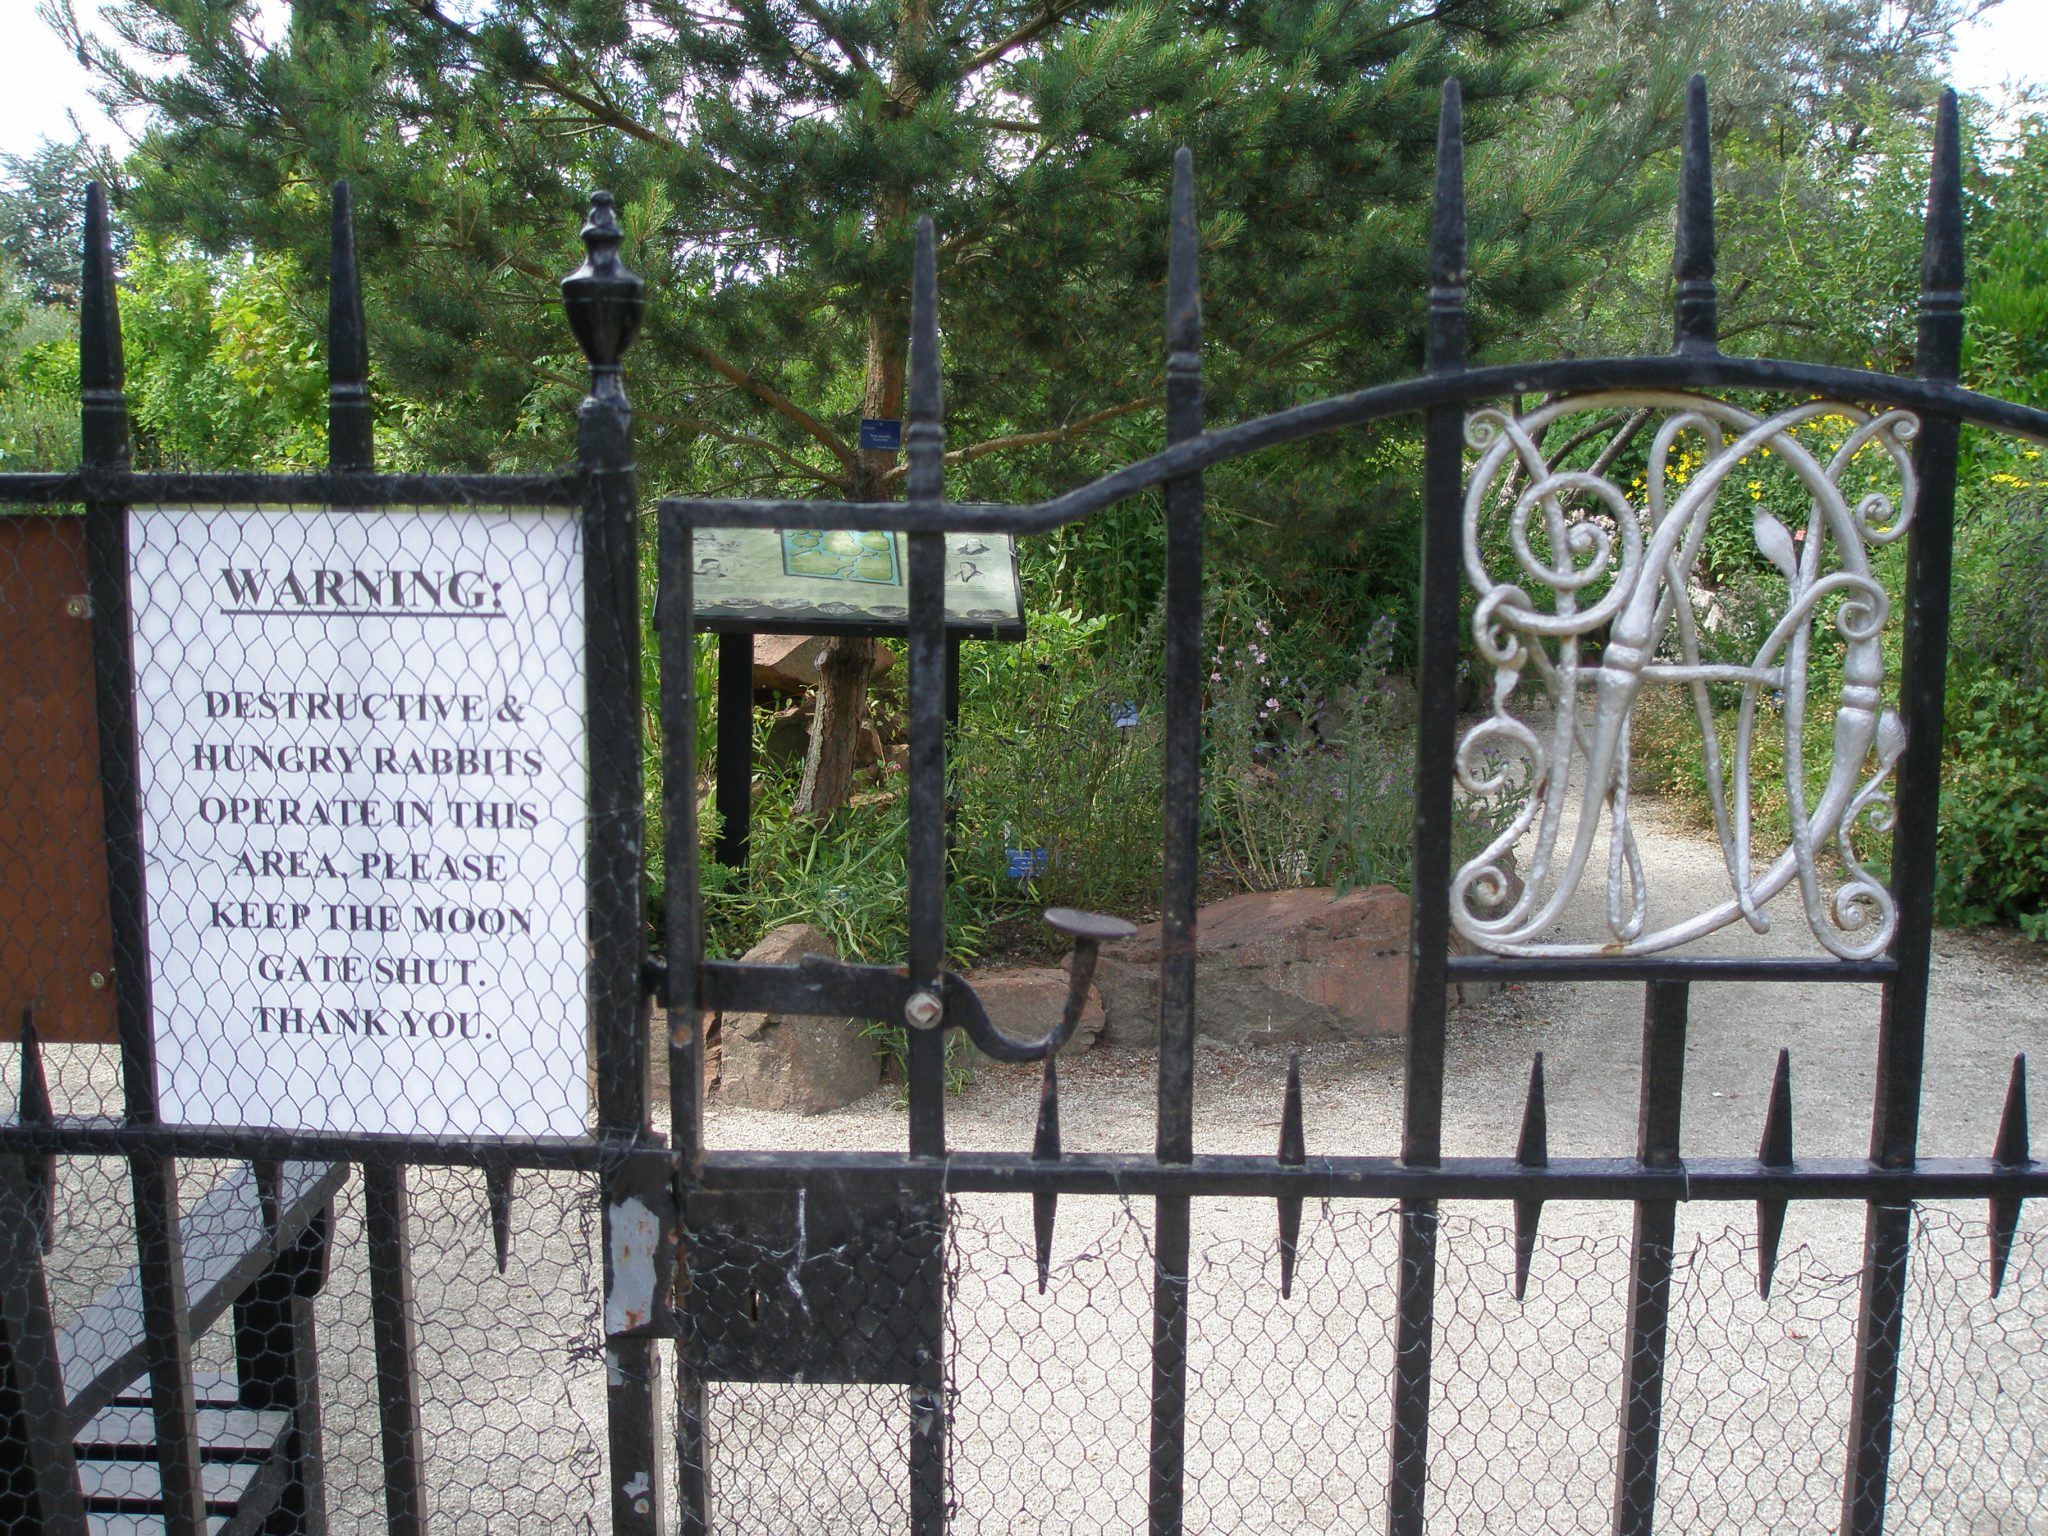 At the Moon Gate Entrance to The World Garden: Beware the Hungry Rabbits. The United Kingdom is just inside the Gate. The British Isles beds contain Scottish Caledonia Pine and Butcher's Broom